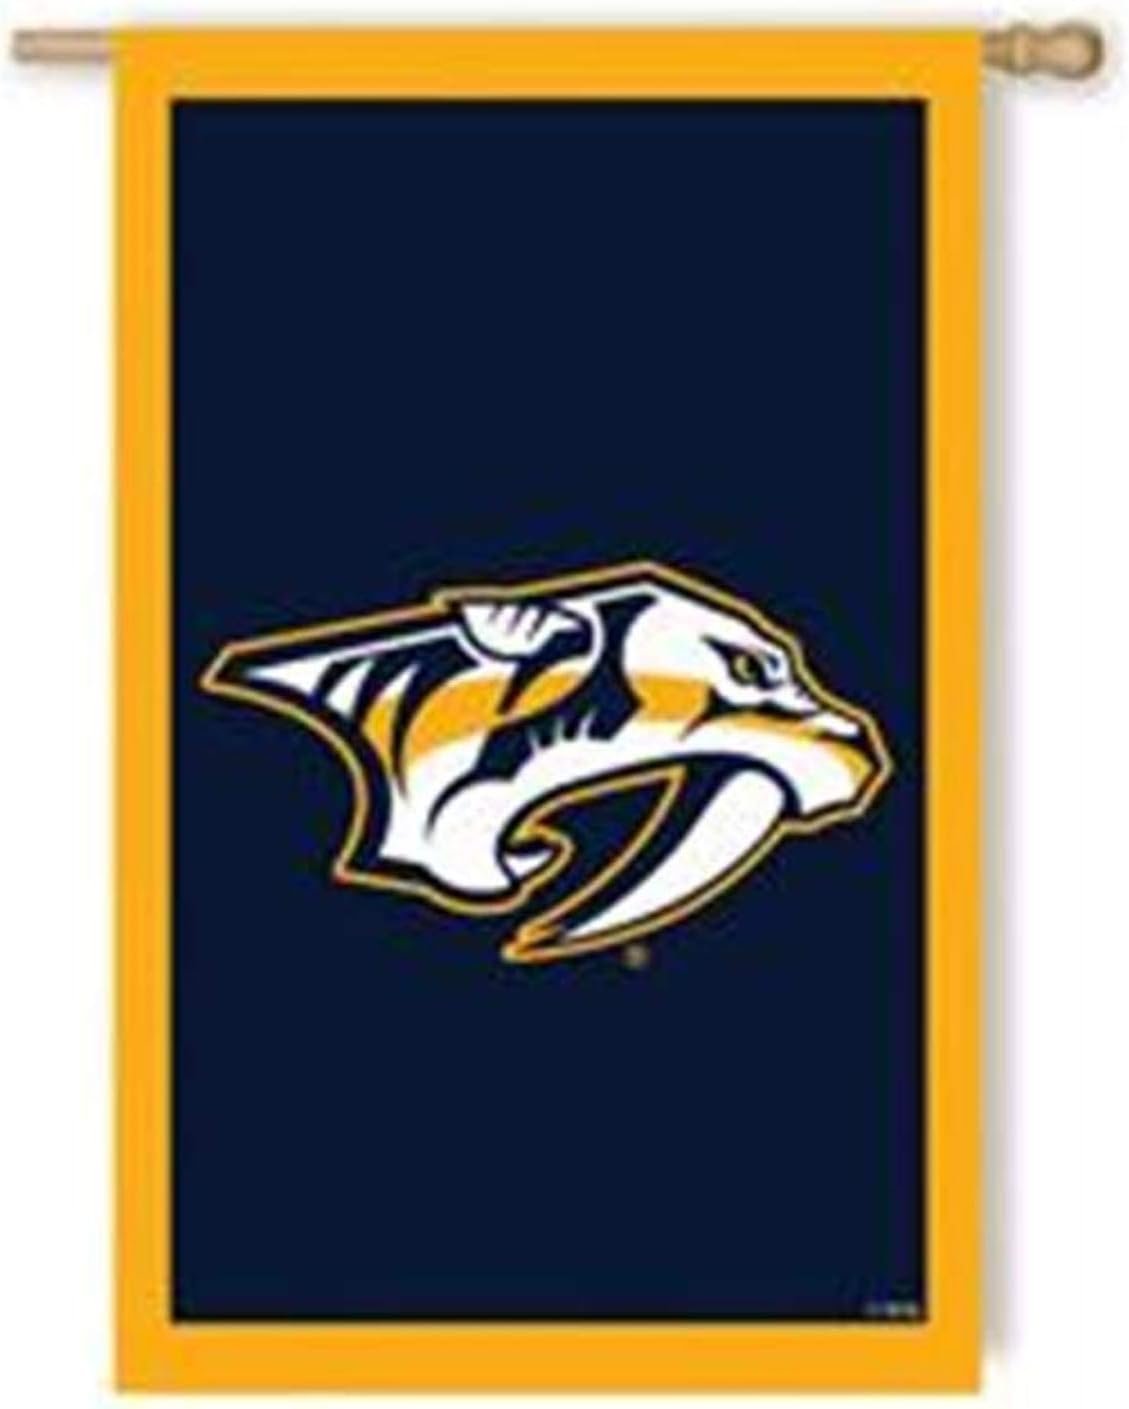 Nashville Predators Premium Double Sided House Flag Banner, Applique Embroidered, 28x44 Inch, Display Pole Sold Separately